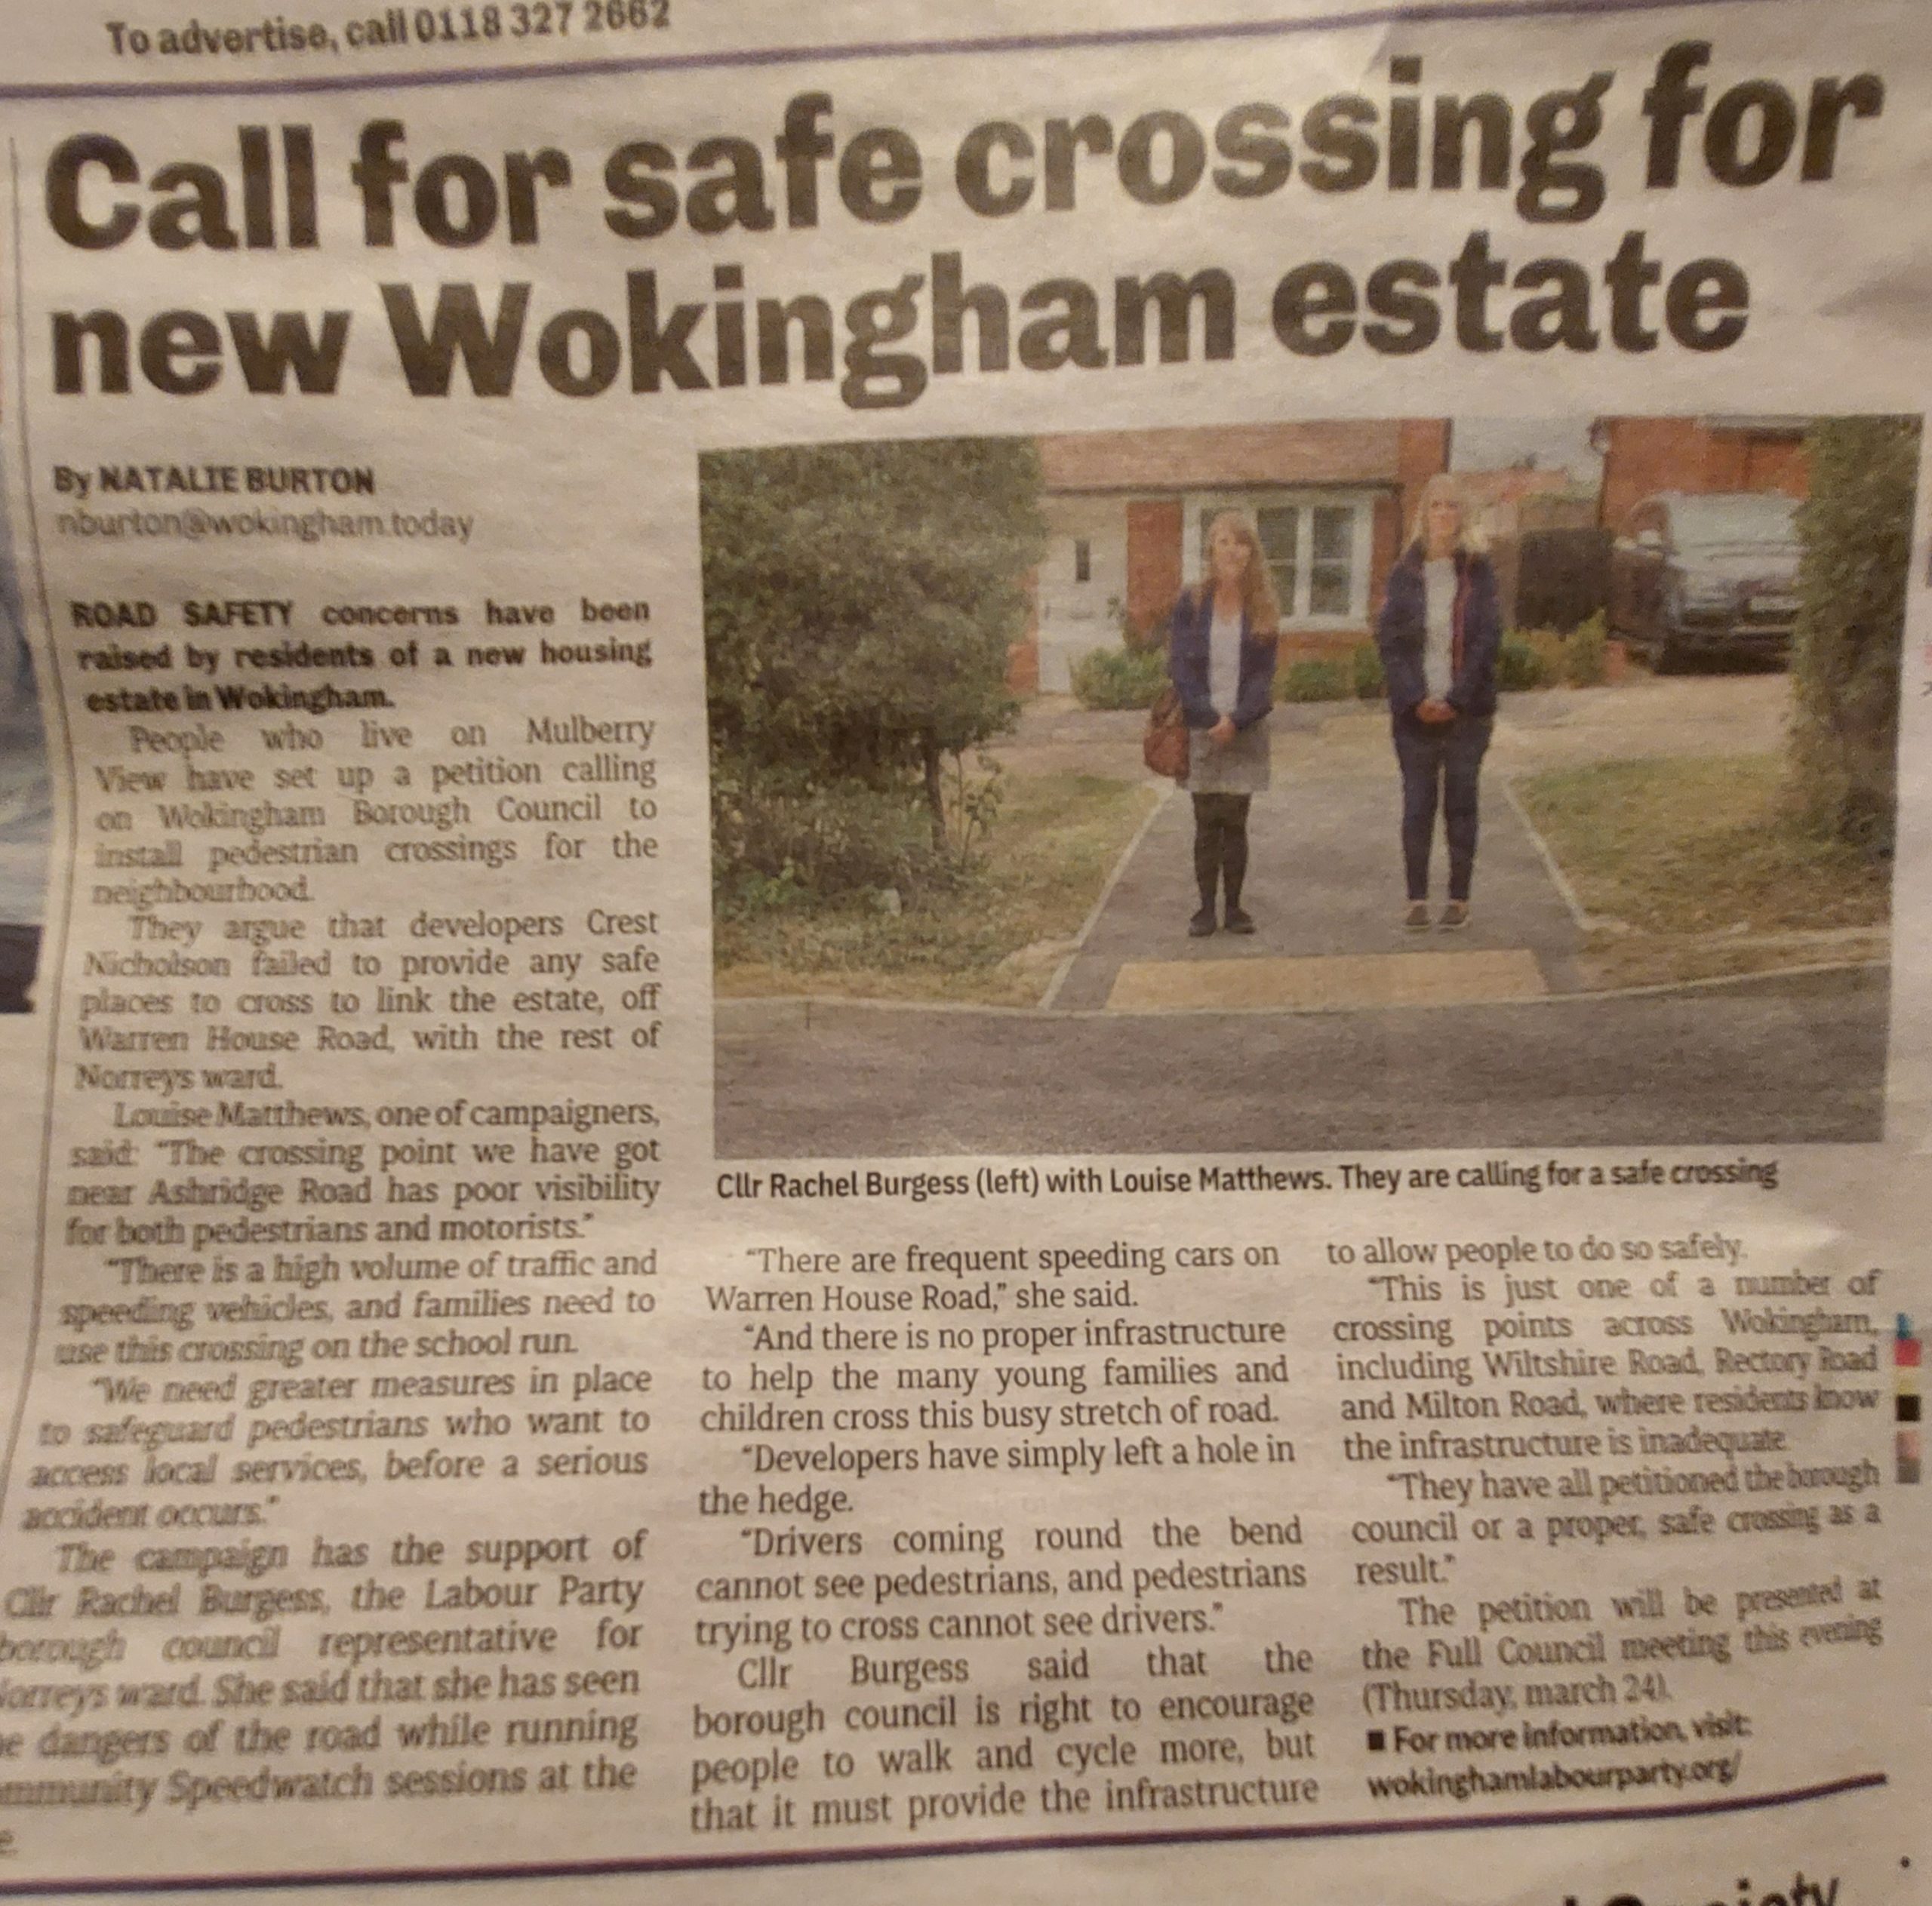 Wokingham.Today coverage of the campaign for a safe crossing on Warren House Road.